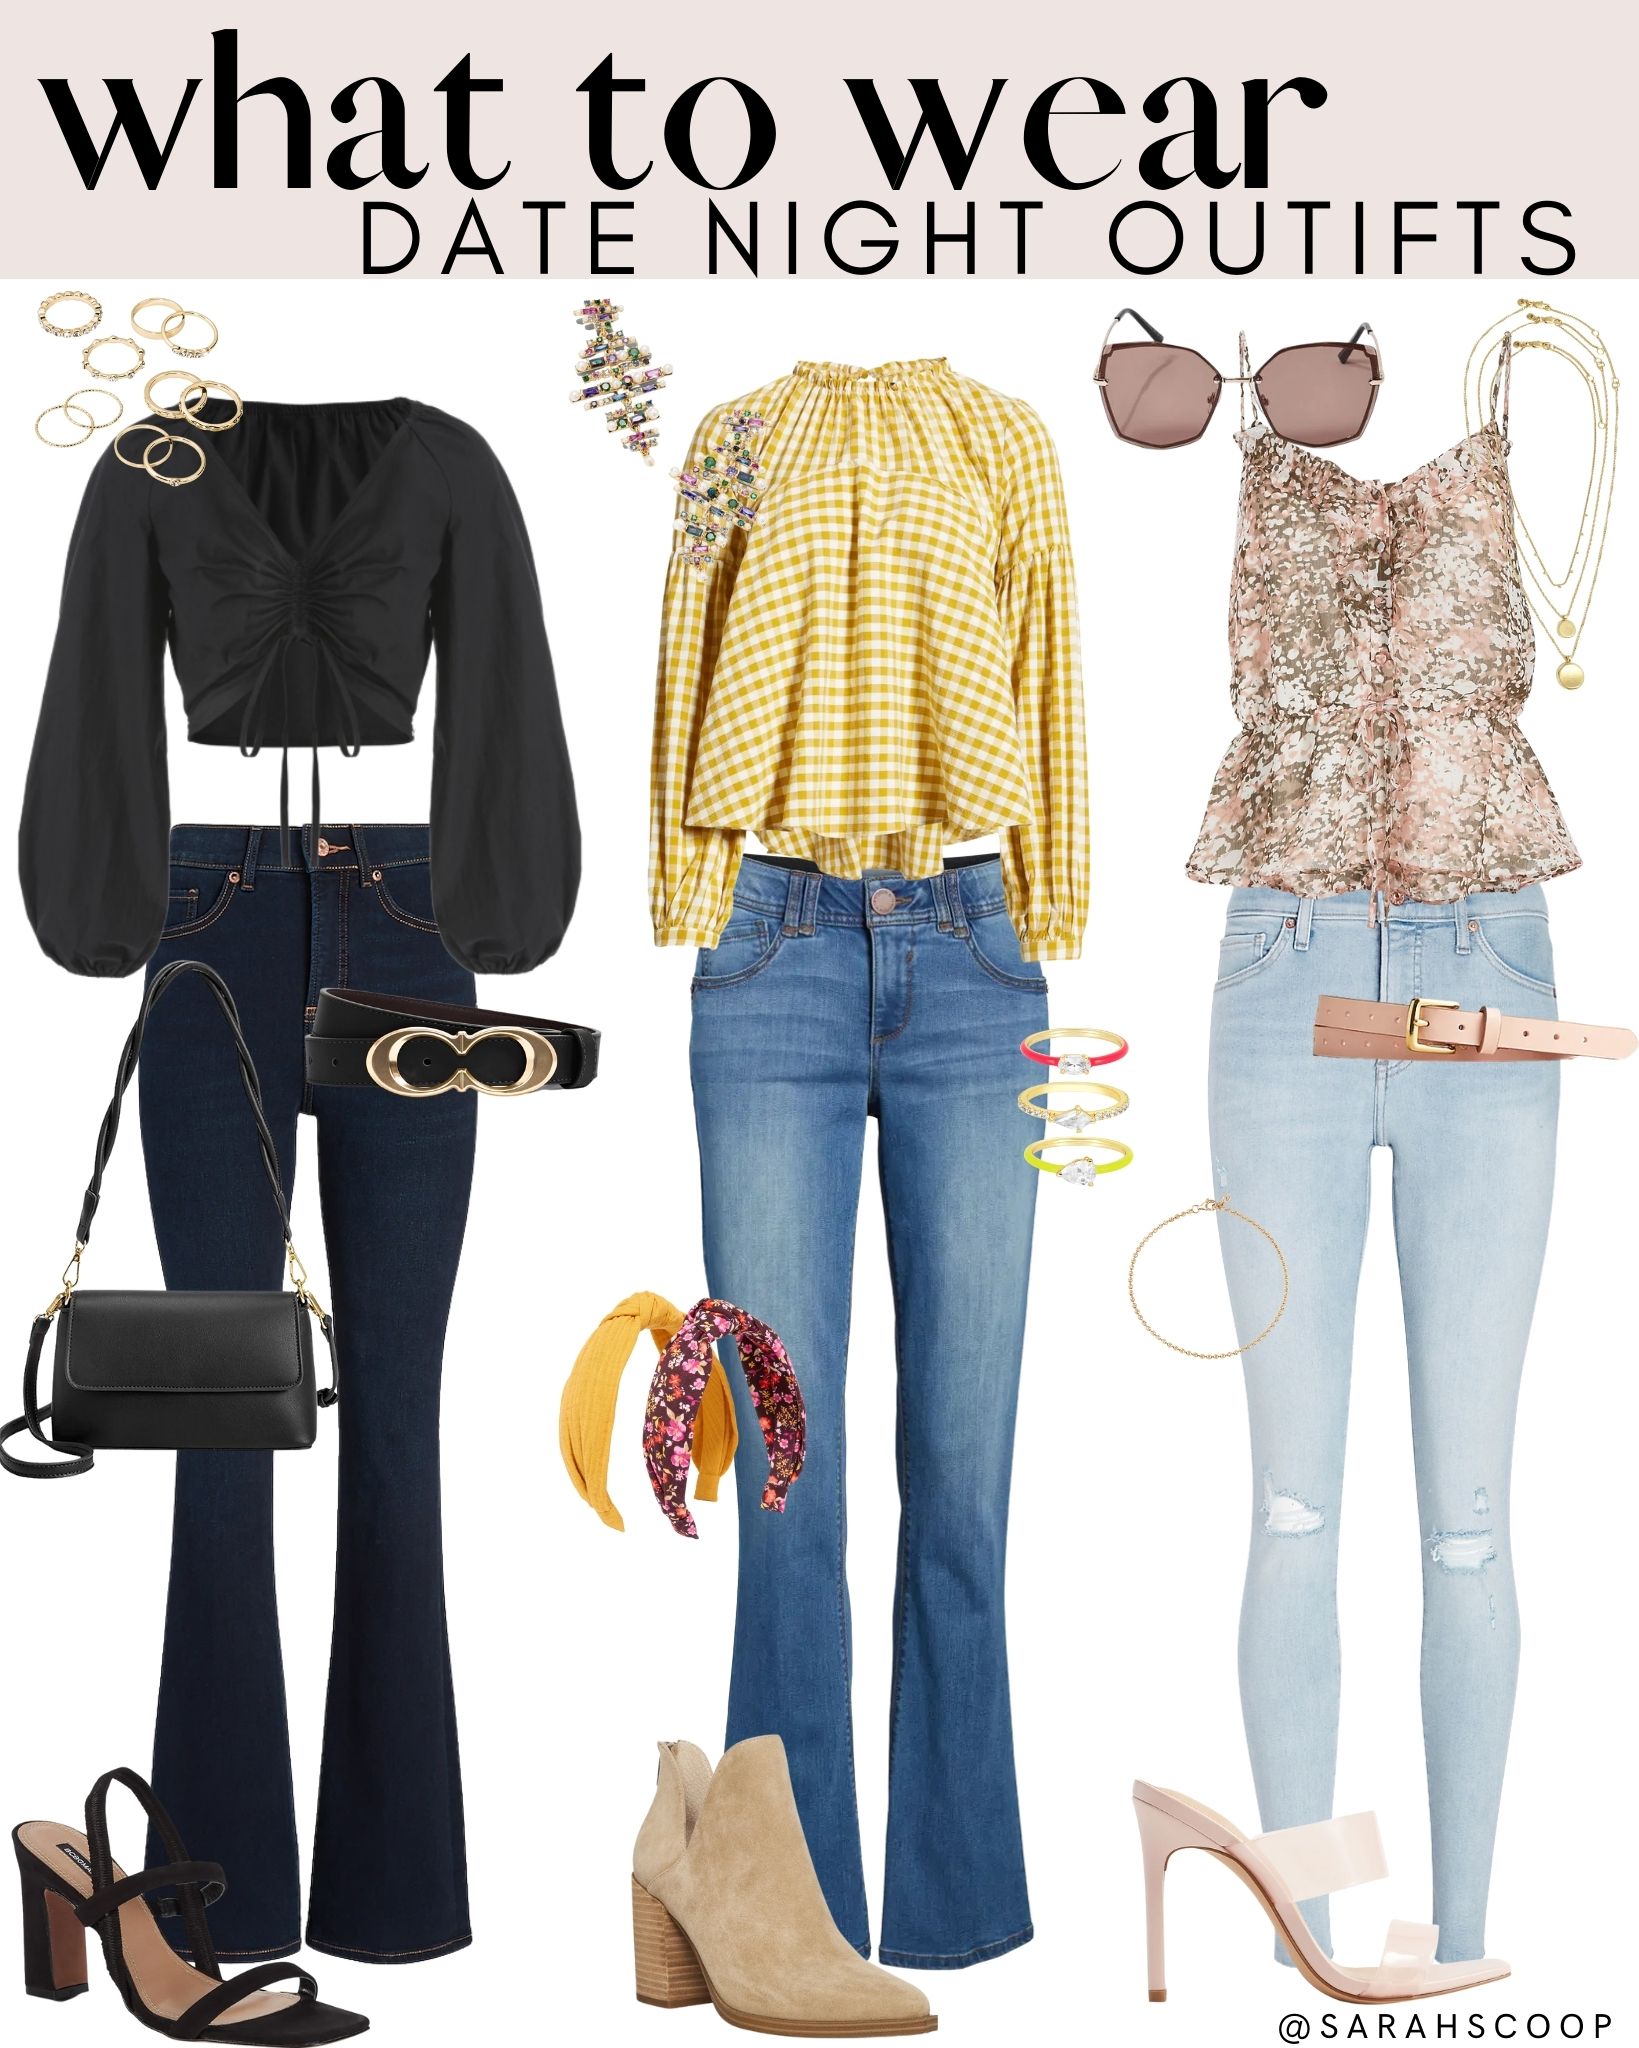 Stylish and Trendy Date Night Outfit Ideas — Neutrally Nicole